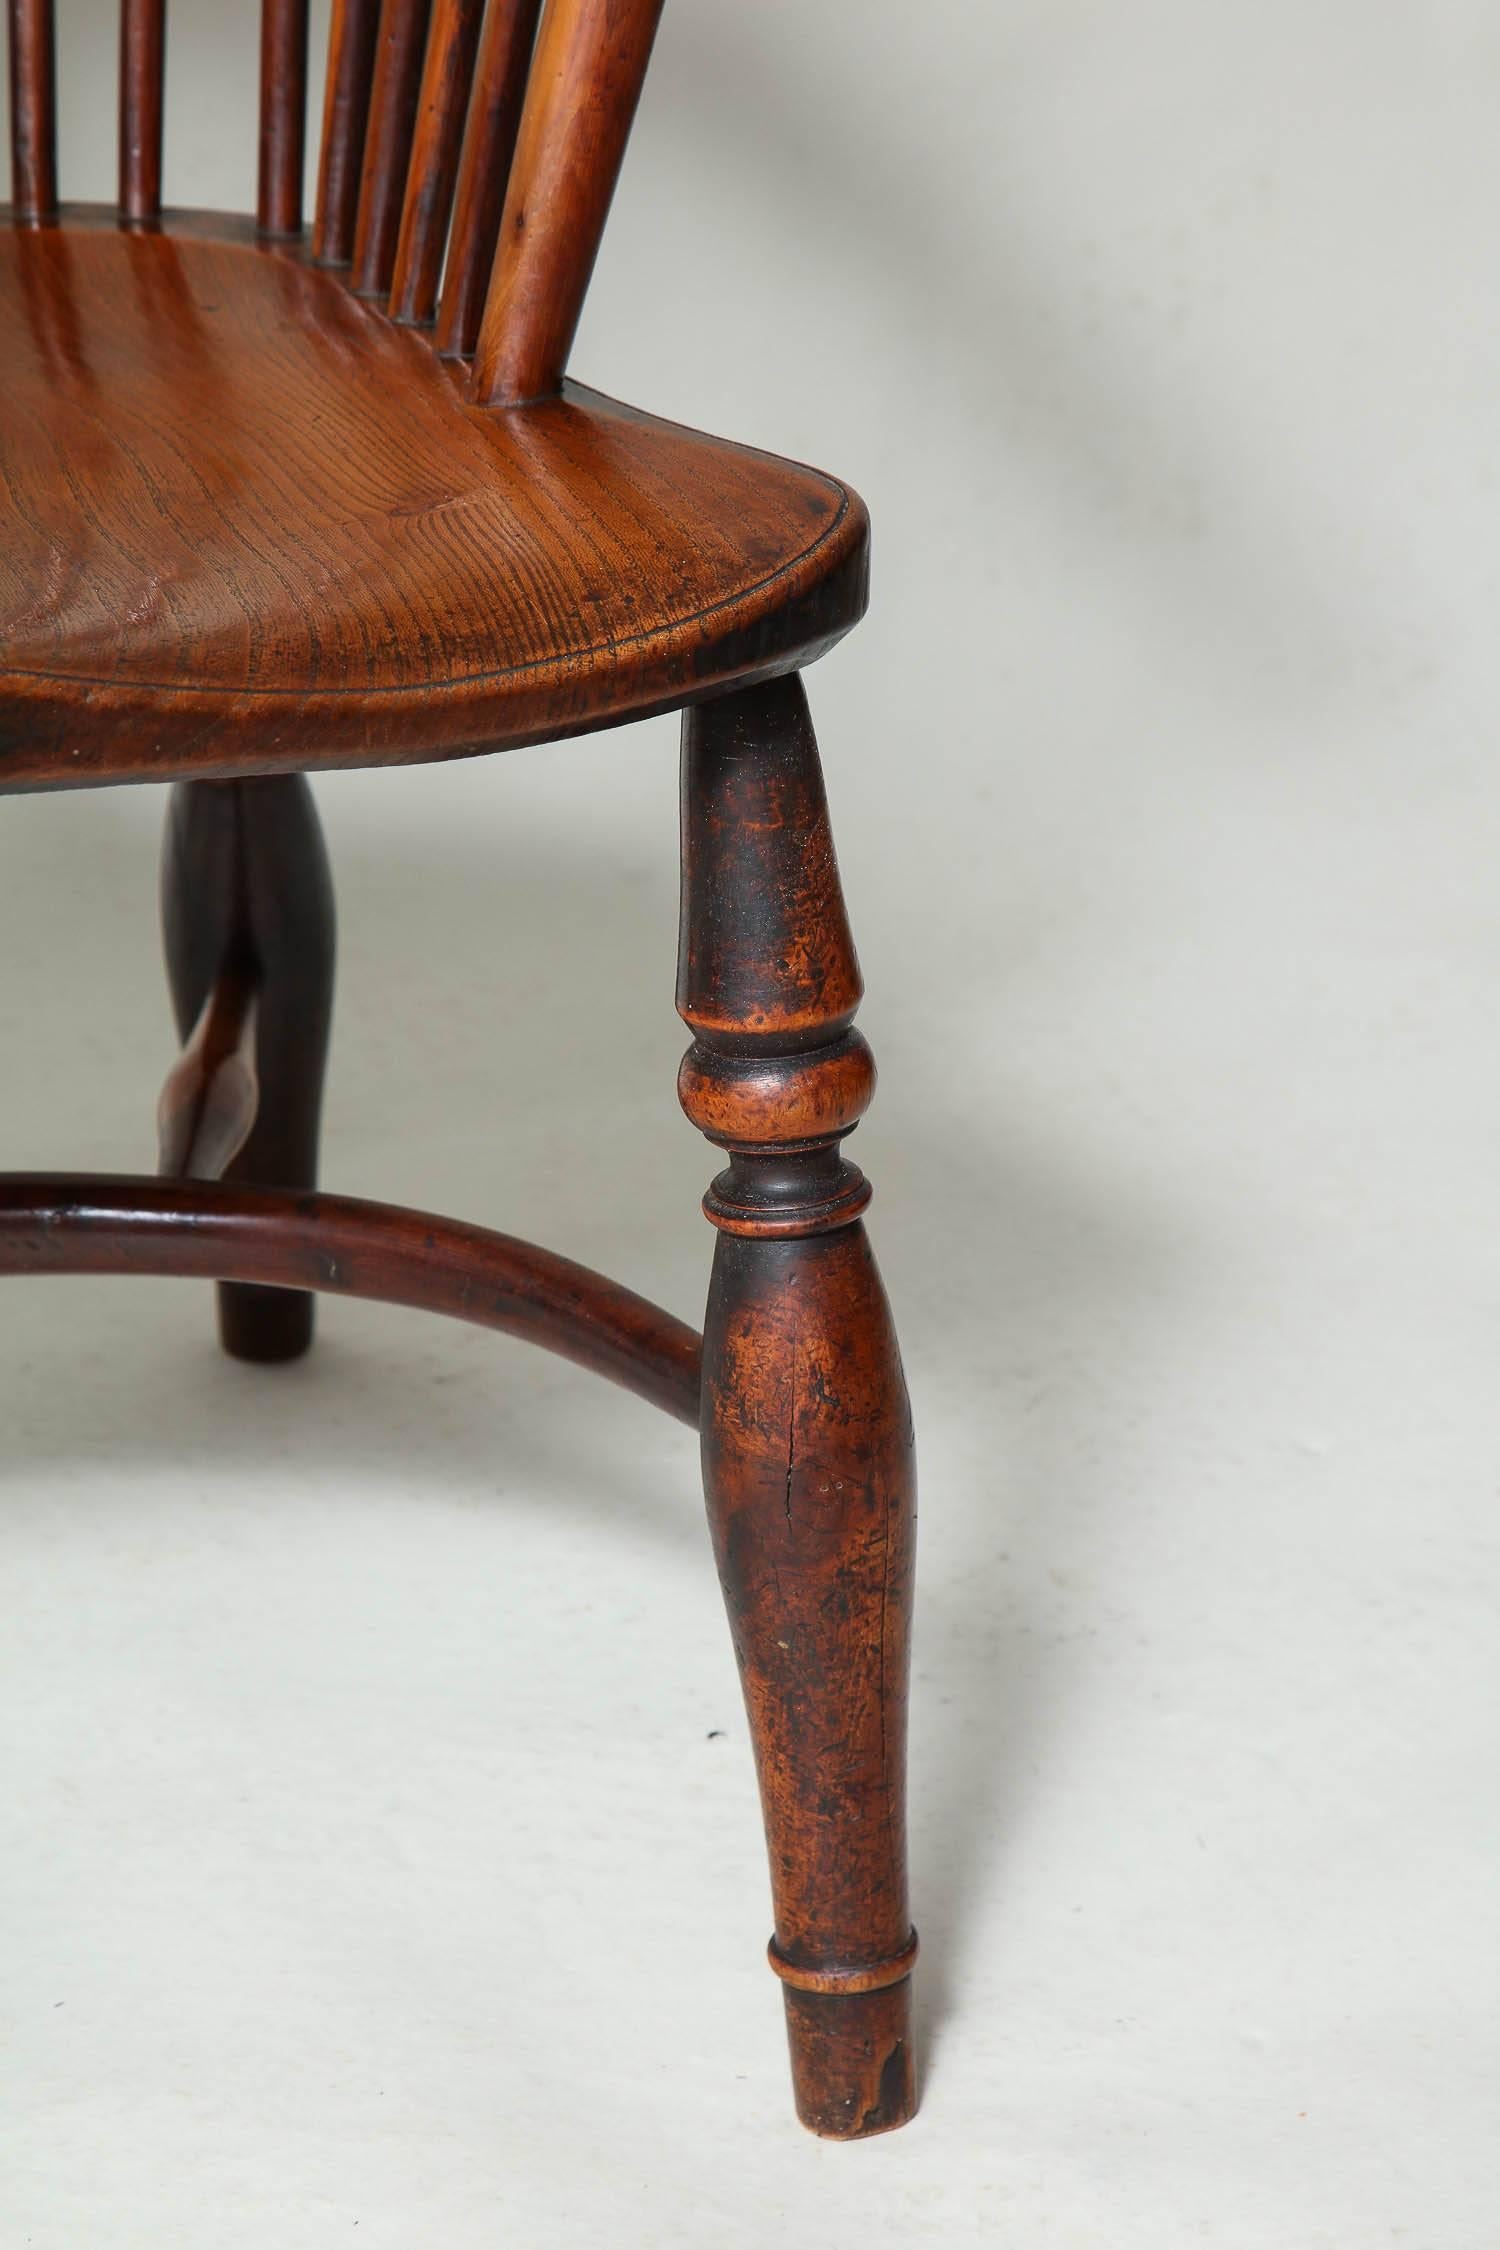 Very fine early 19th century English yew wood windsor hoop back armchair, the pierced splat with 